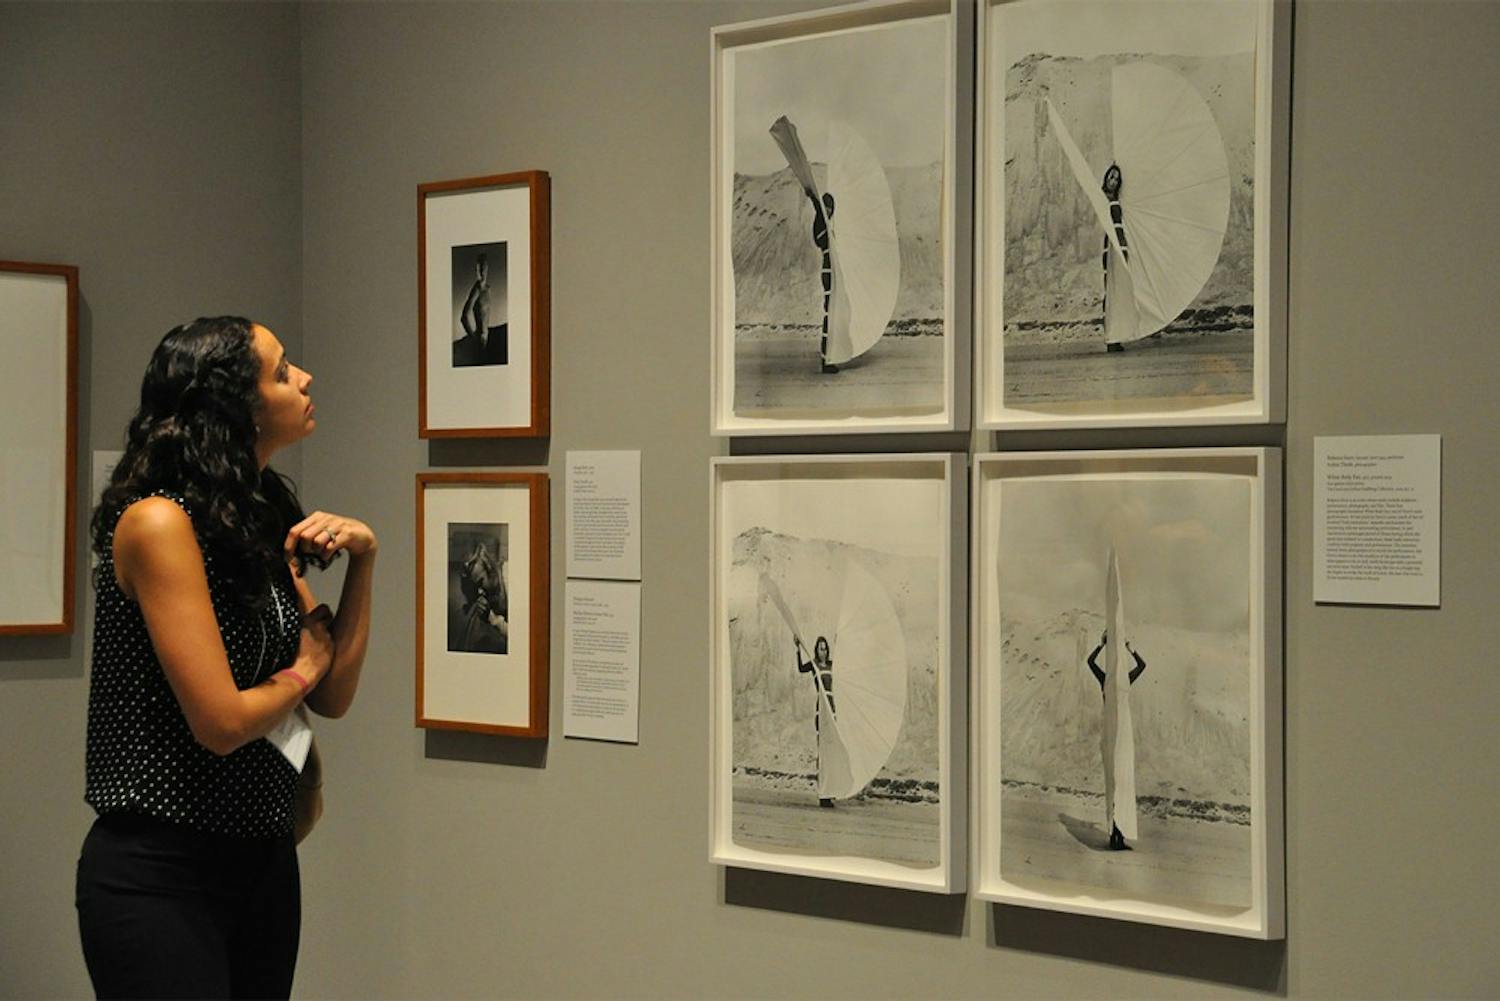 Ackland Art Museum opened its exhibit "PhotoVision" on Thursday, Sept. 18, 2014. The exhibit featured around 150 photographs tracing the history of photography from the nineteenth century to the twenty-first century. Above is Sarada Schossow, a guest at the opening.